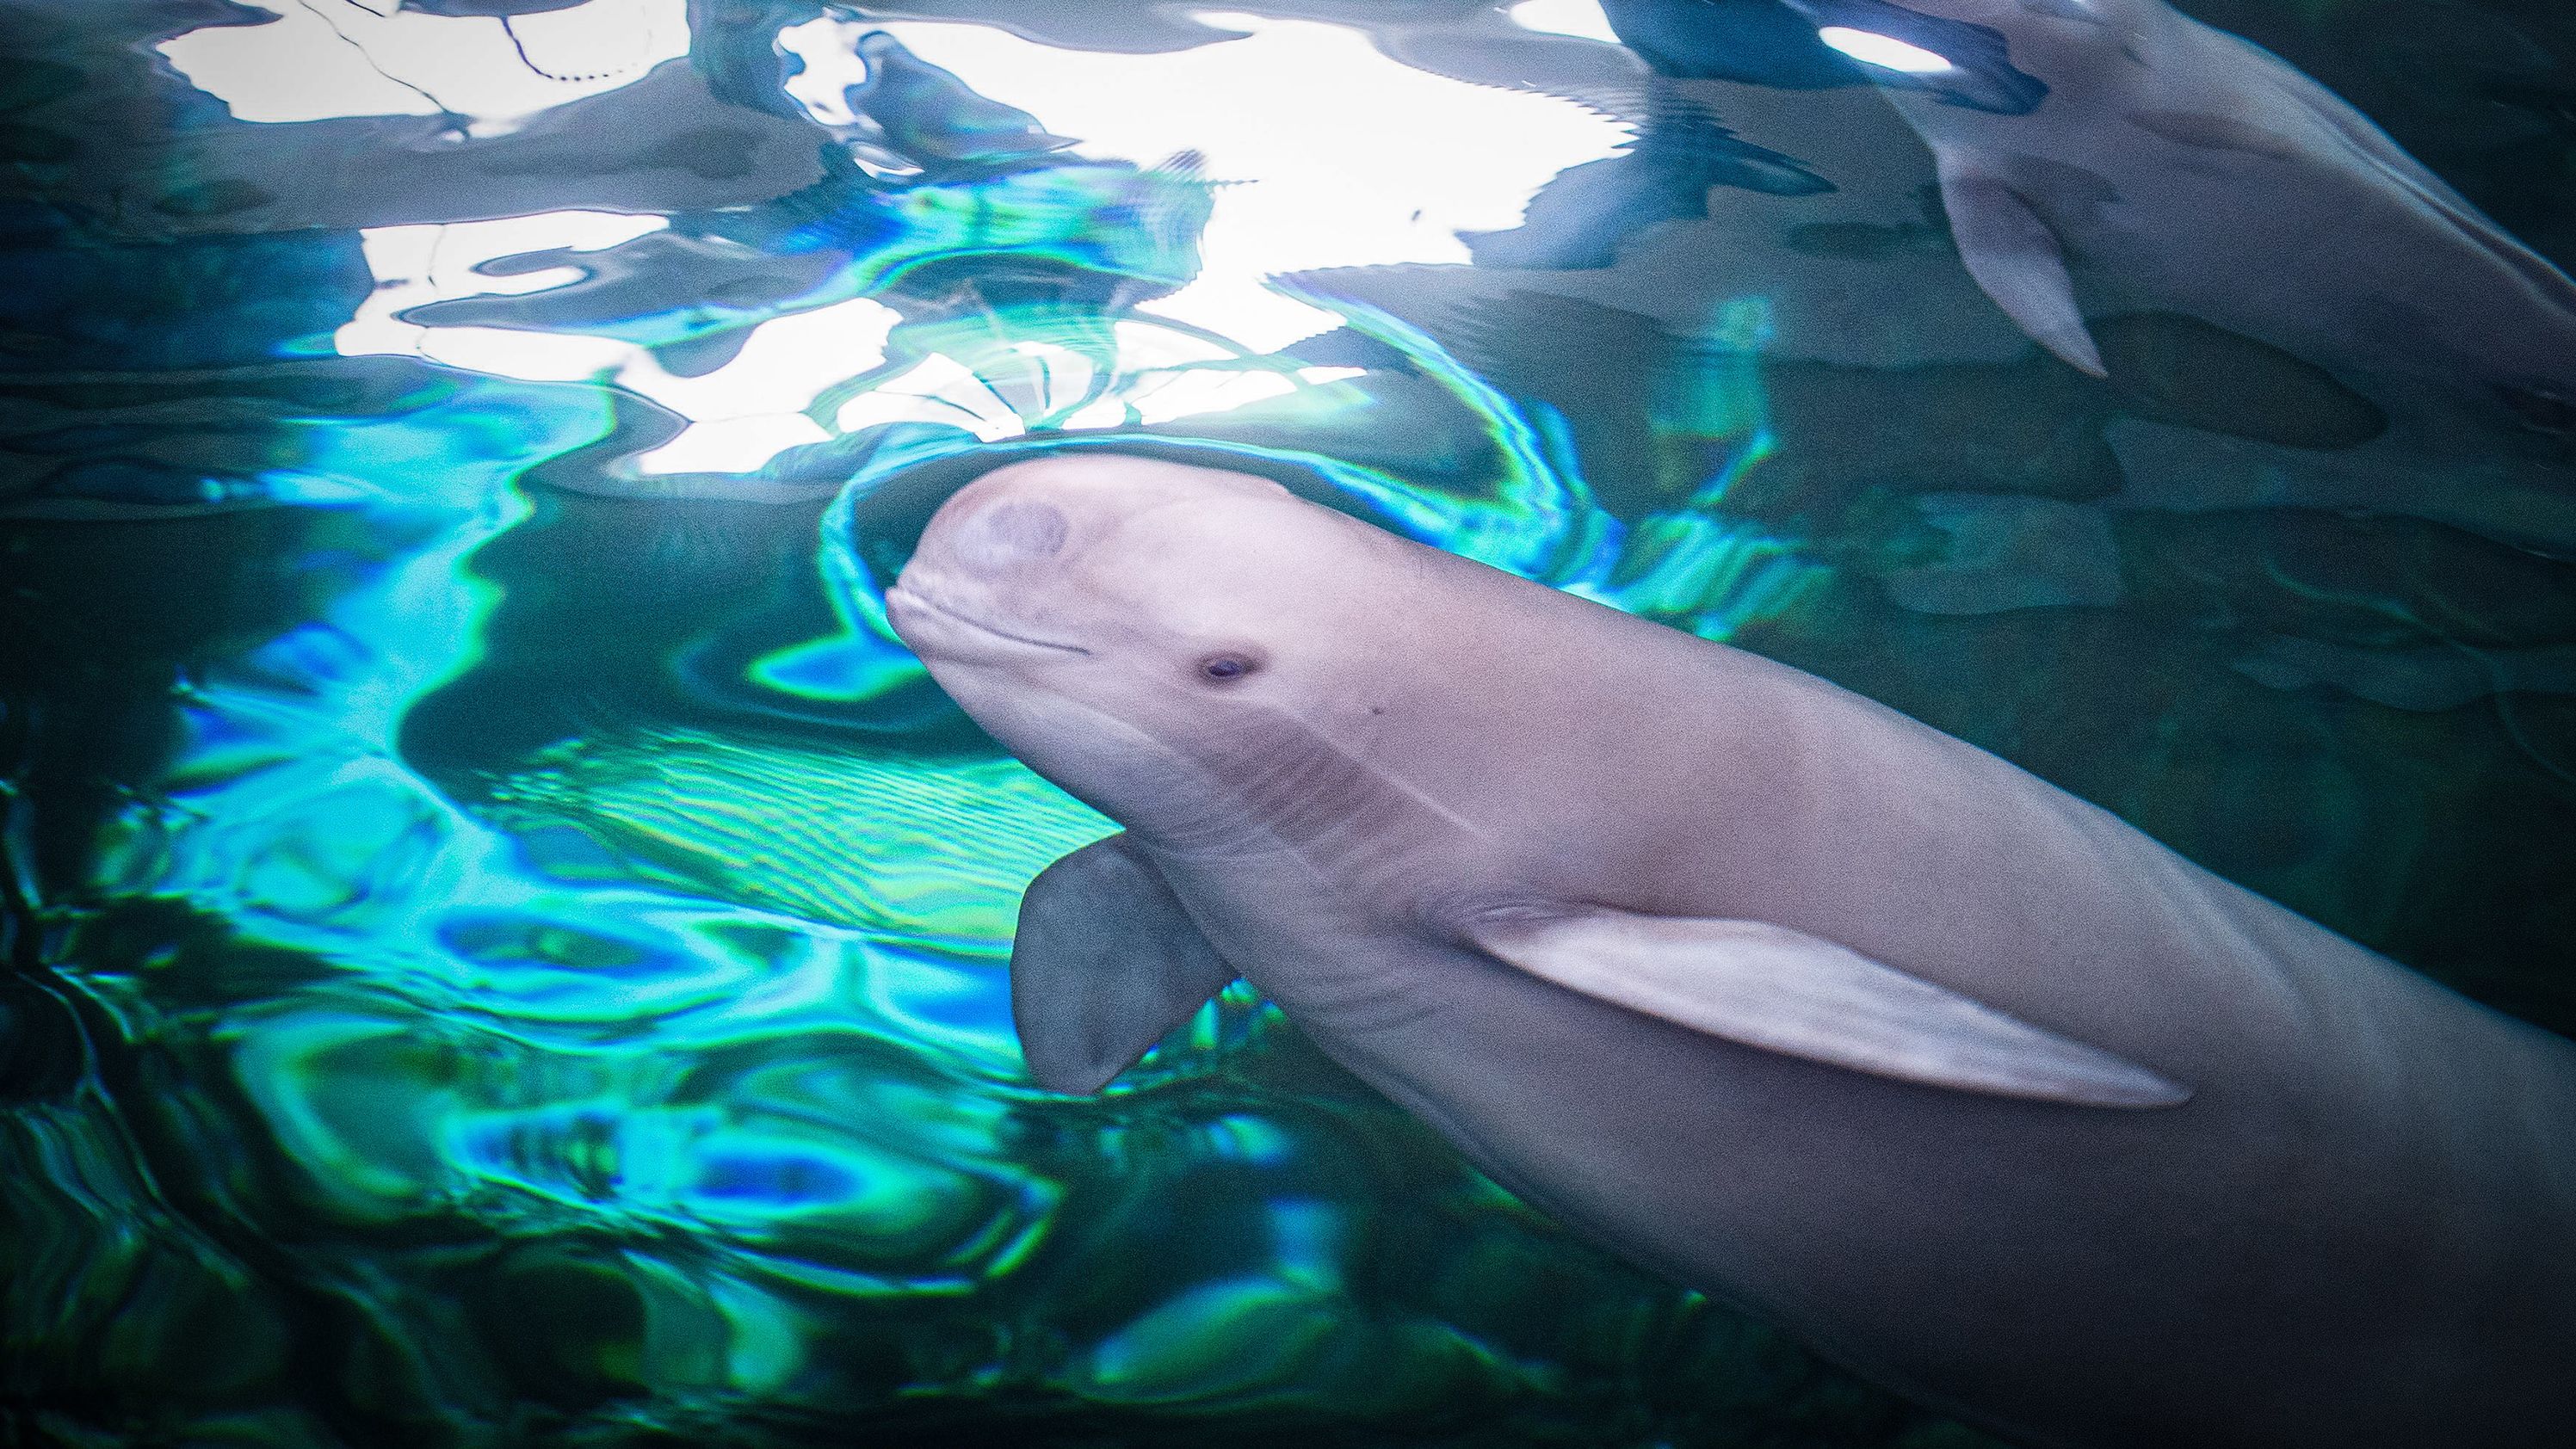 A critically endangered Yangtze finless porpoise swims in a tank at a conservation facility in Wuhan, China.